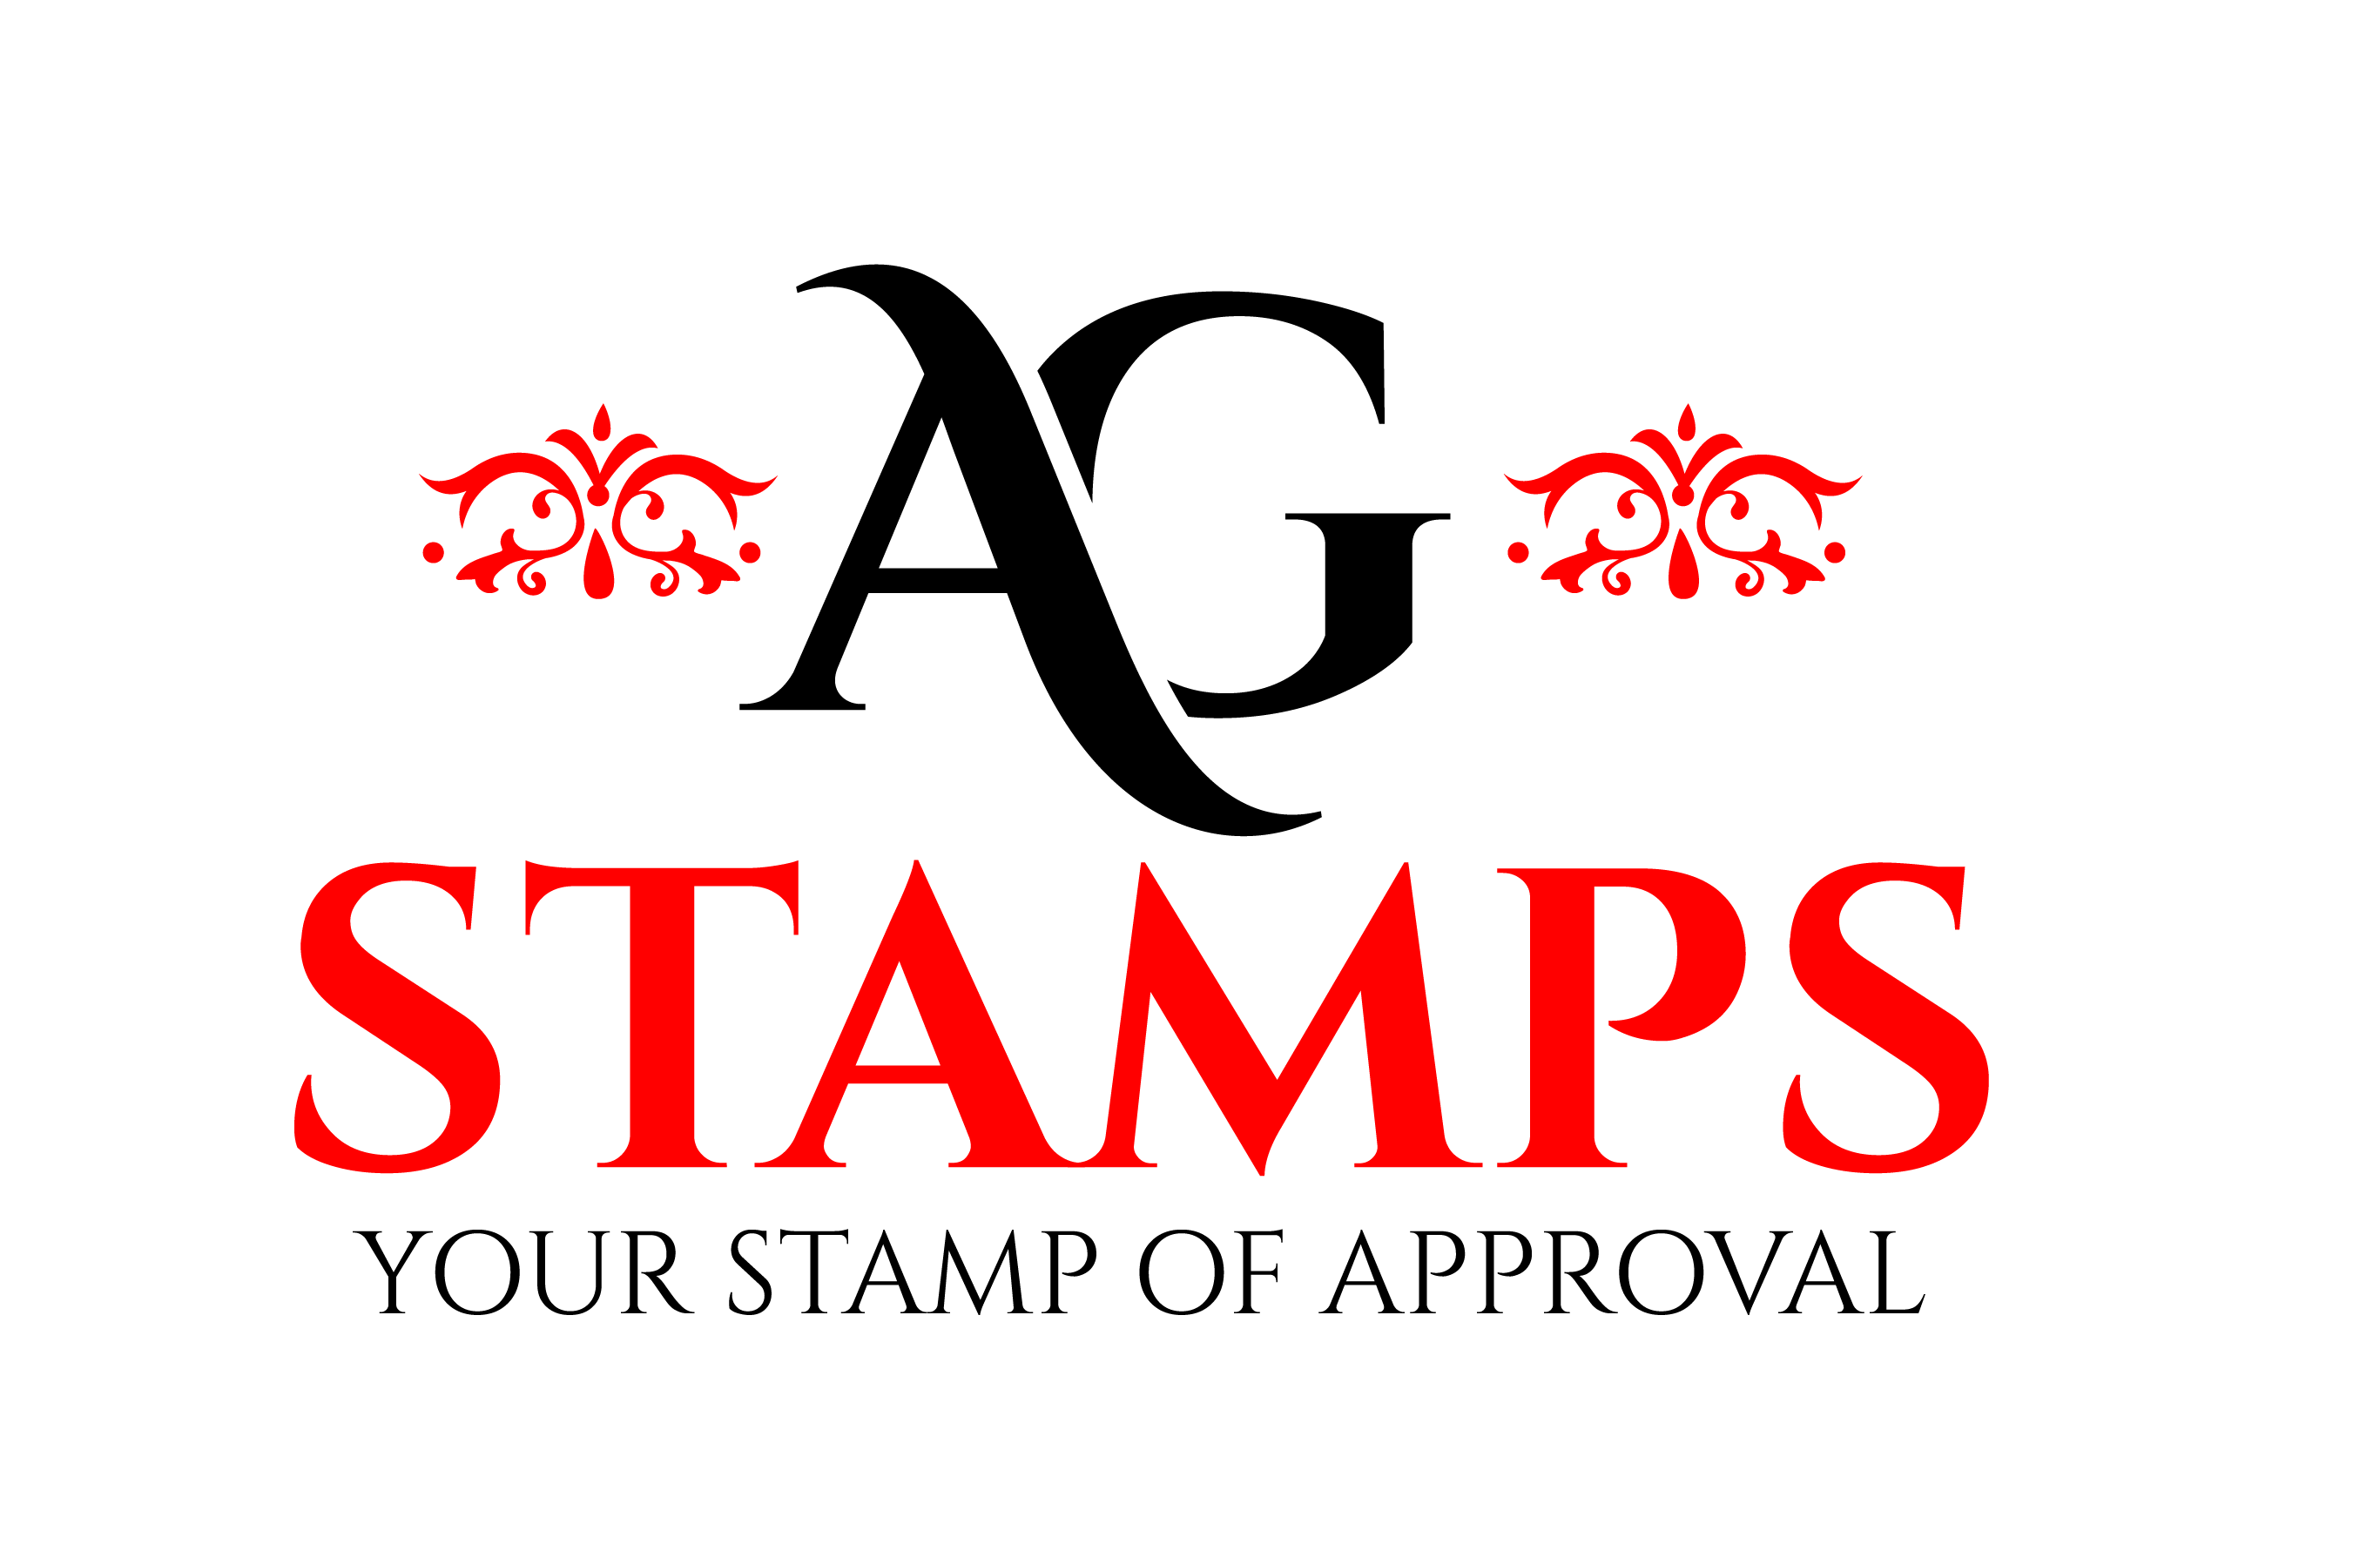 AGStamps